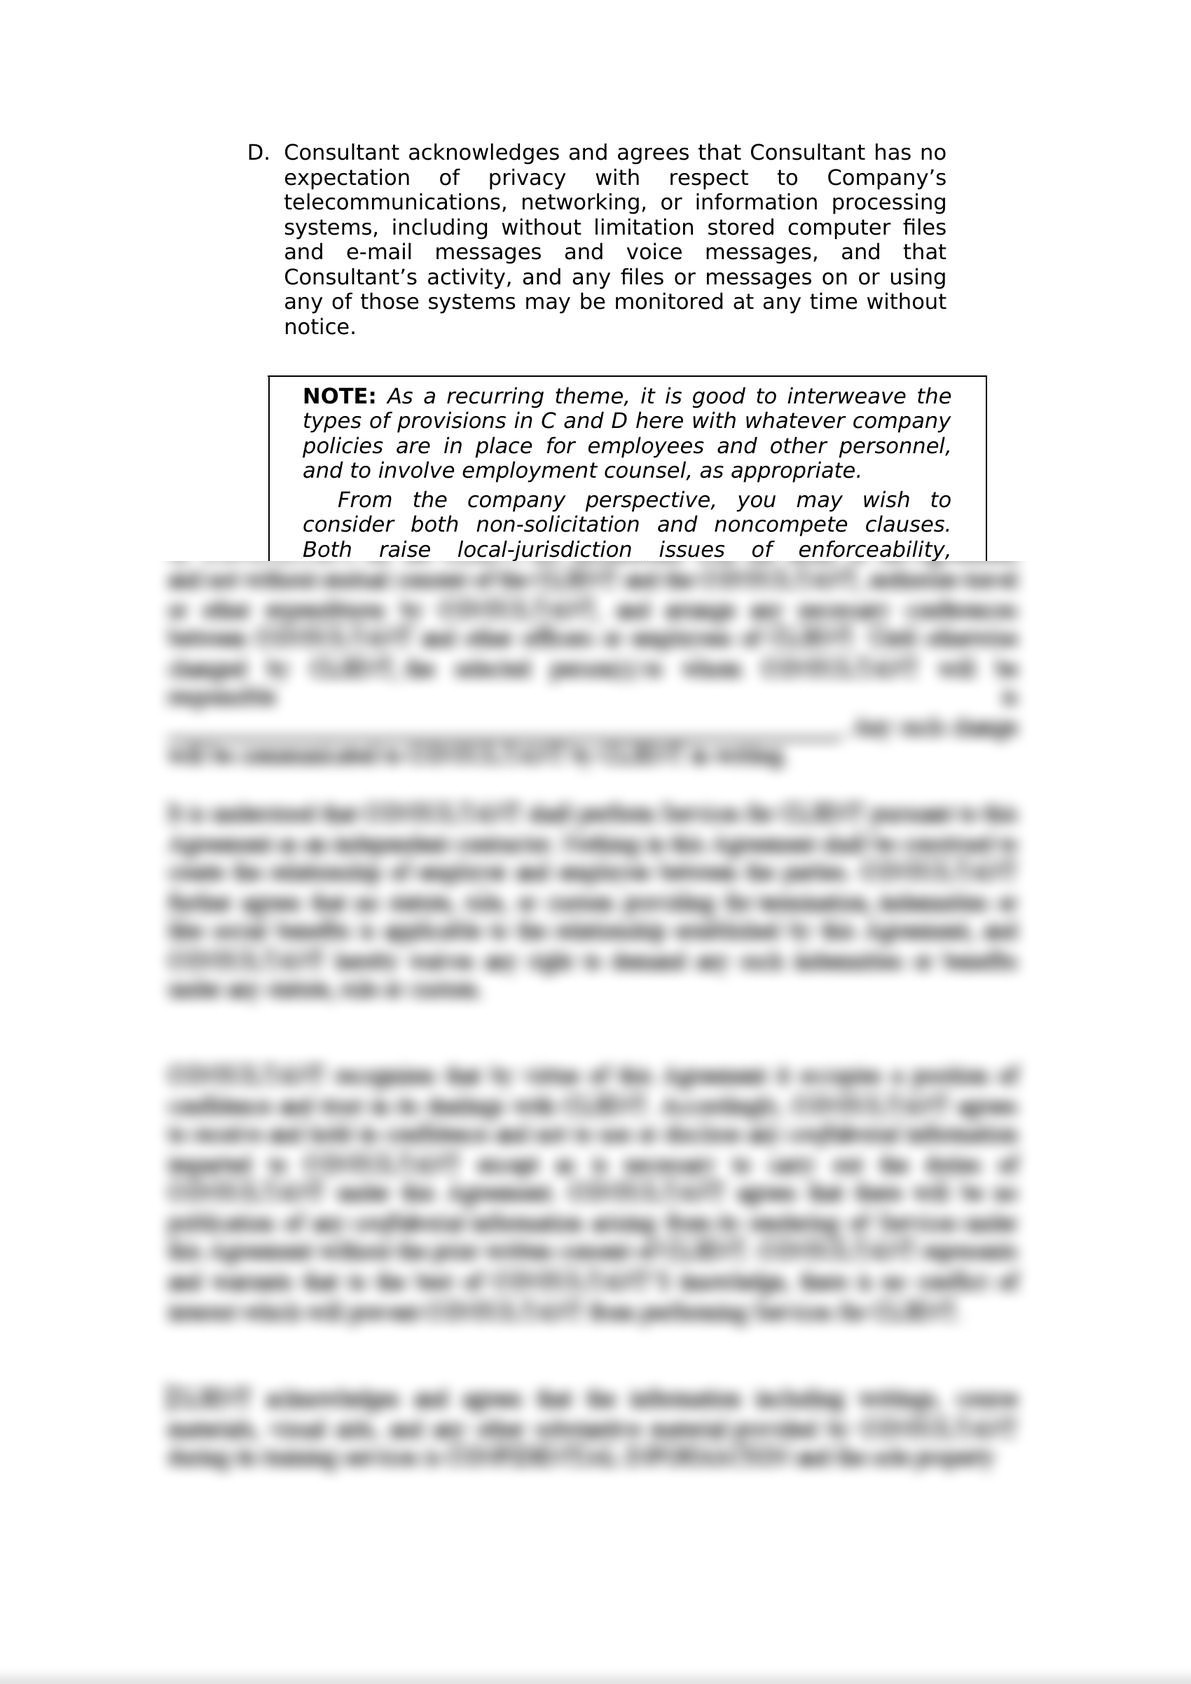 Consulting Agreement (IP Context)-4